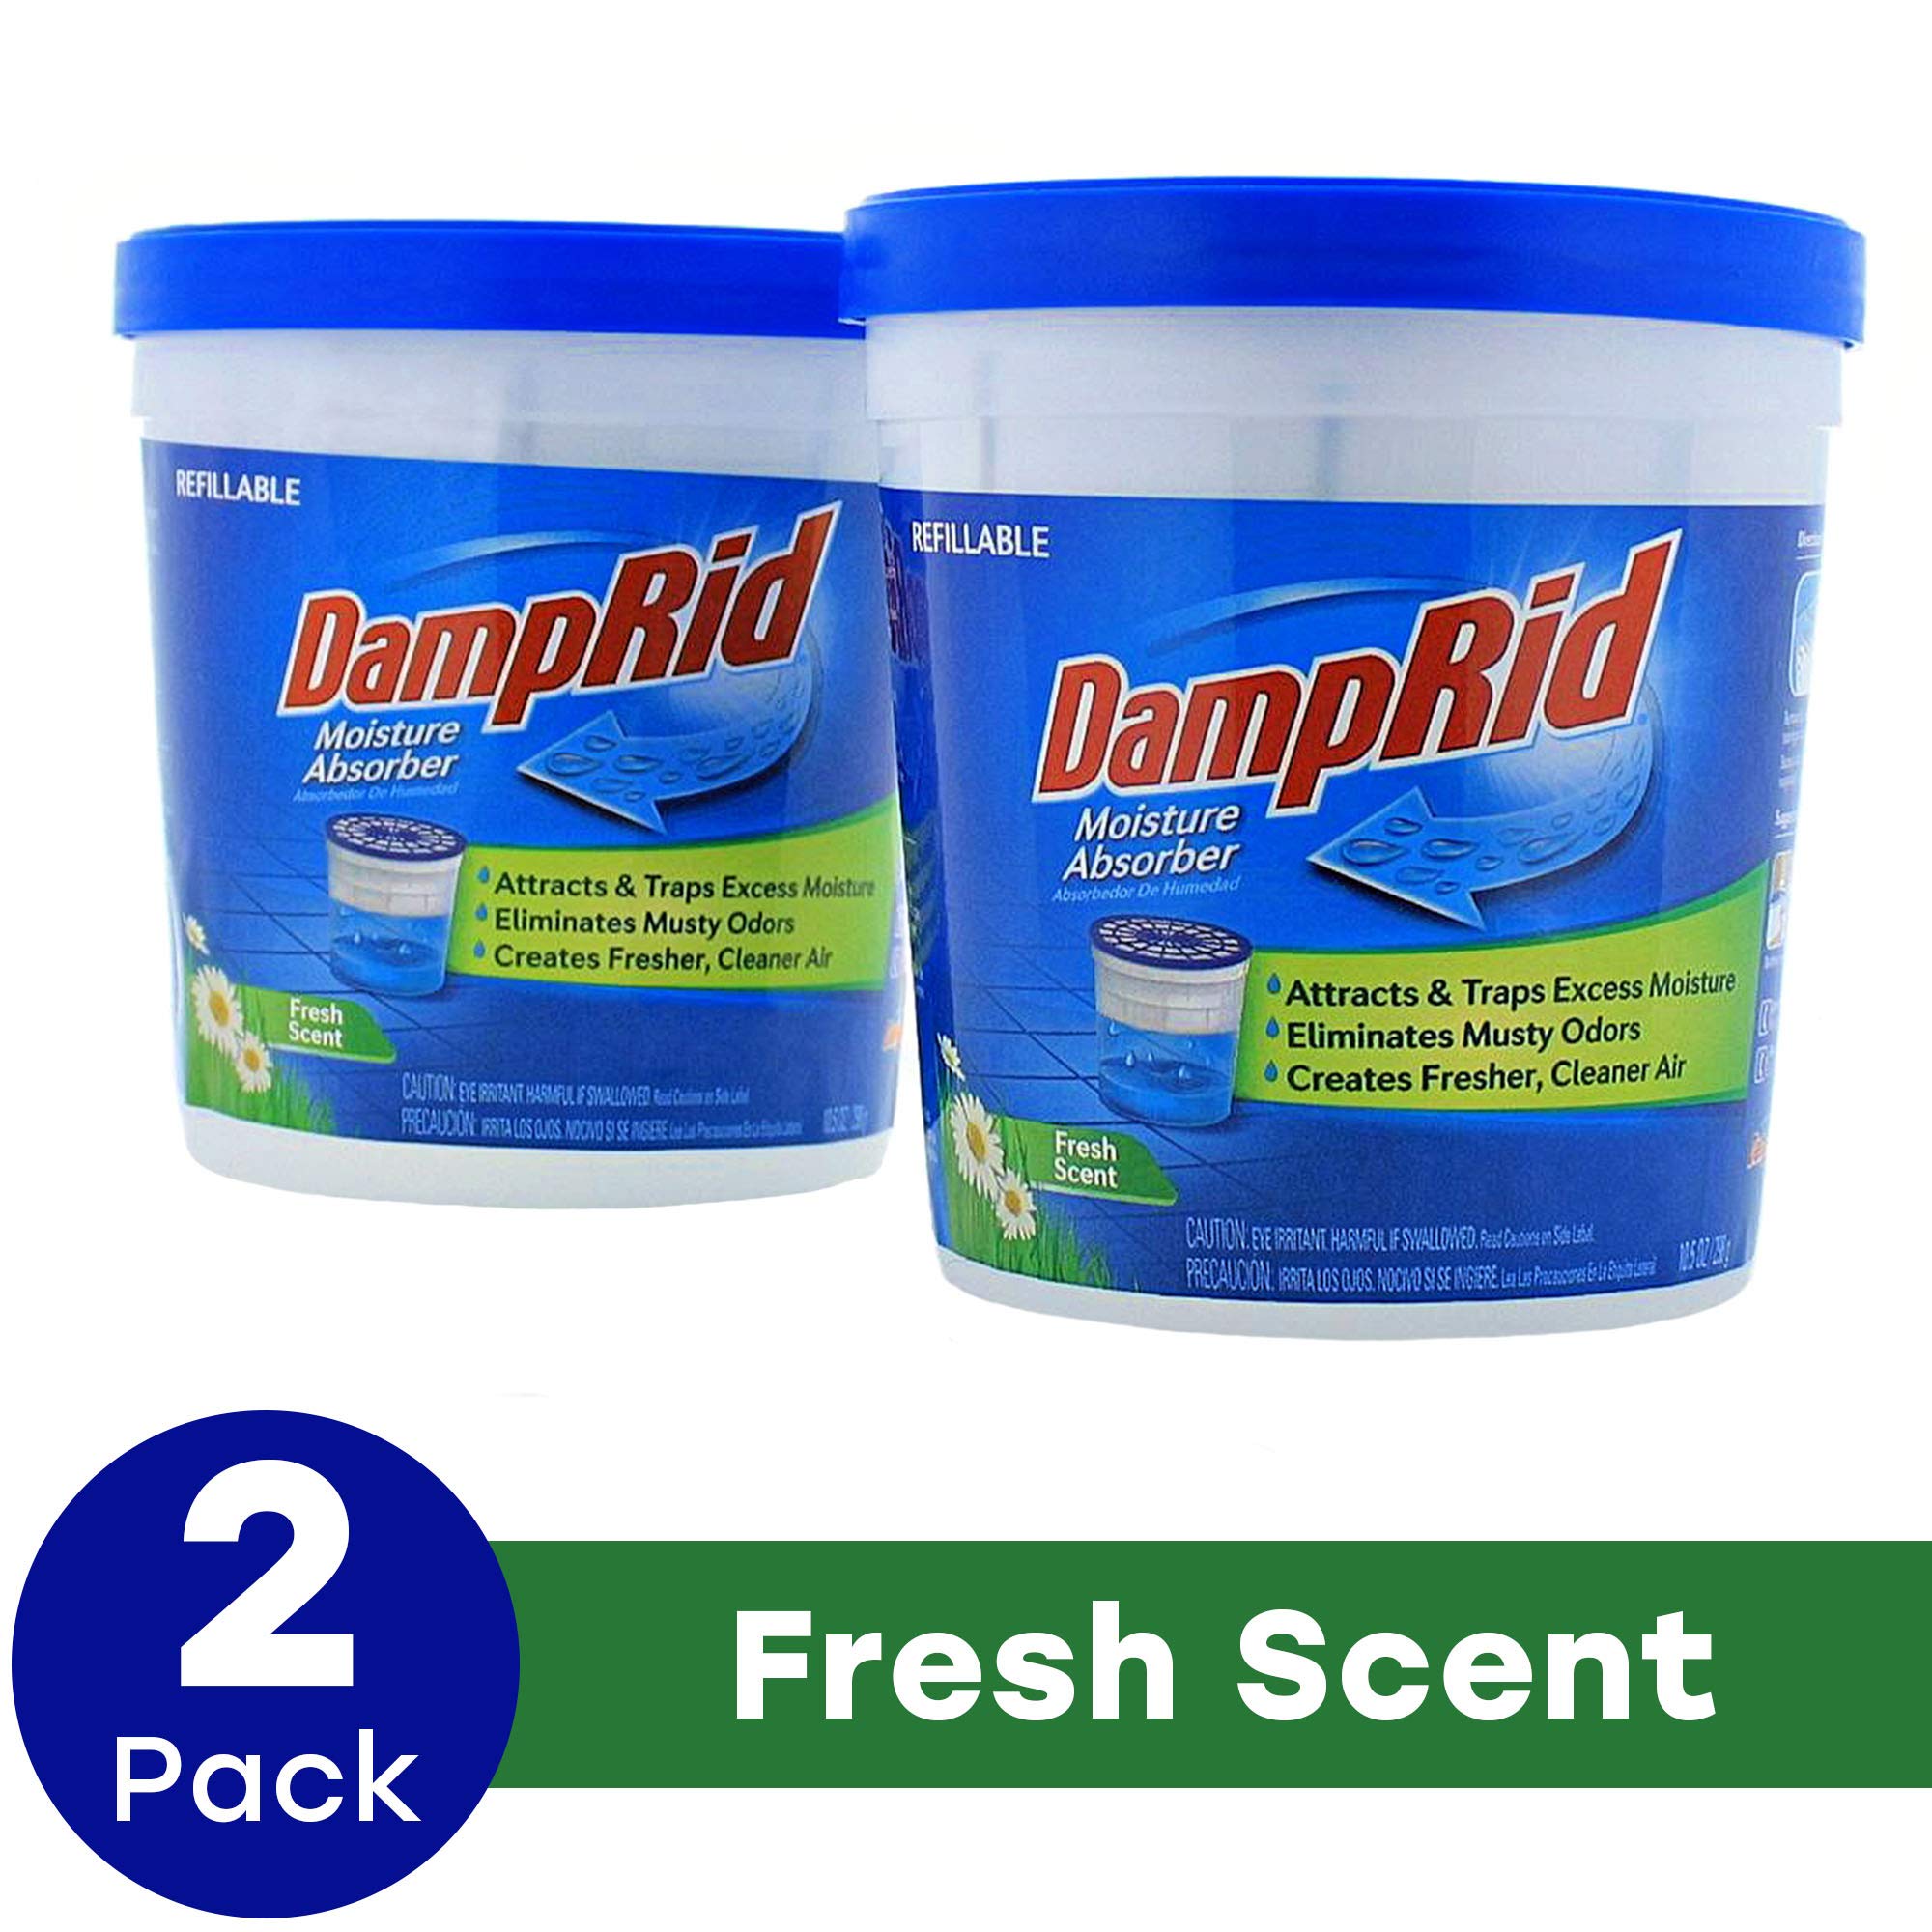 DampRid Fresh Scent Refillable Moisture Absorber - 10.5oz cups - 2 pack – Traps Moisture for Fresher, Cleaner Air